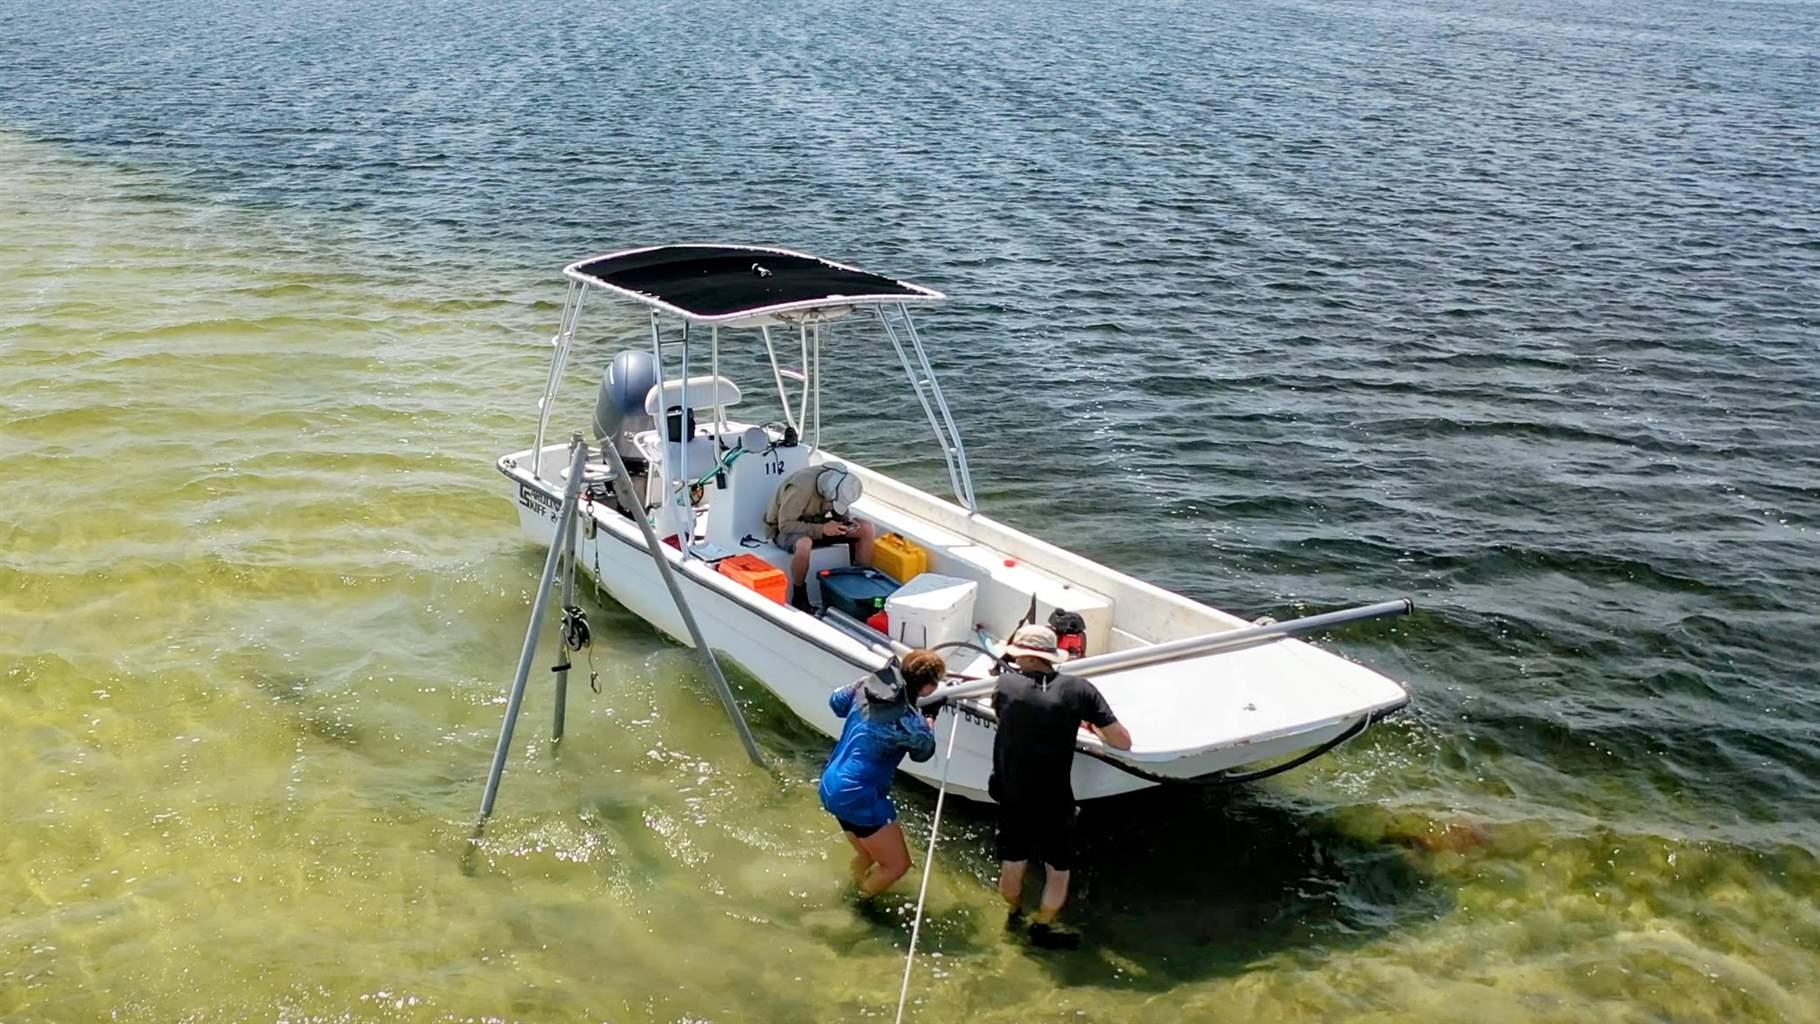 A flat-bottomed boat floats above visible underwater vegetation on the edge of deeper water, under slightly overcast skies. Two people stand in the shallow water and work with equipment moored to the boat. A third person sits in the boat under the pilot house canopy.